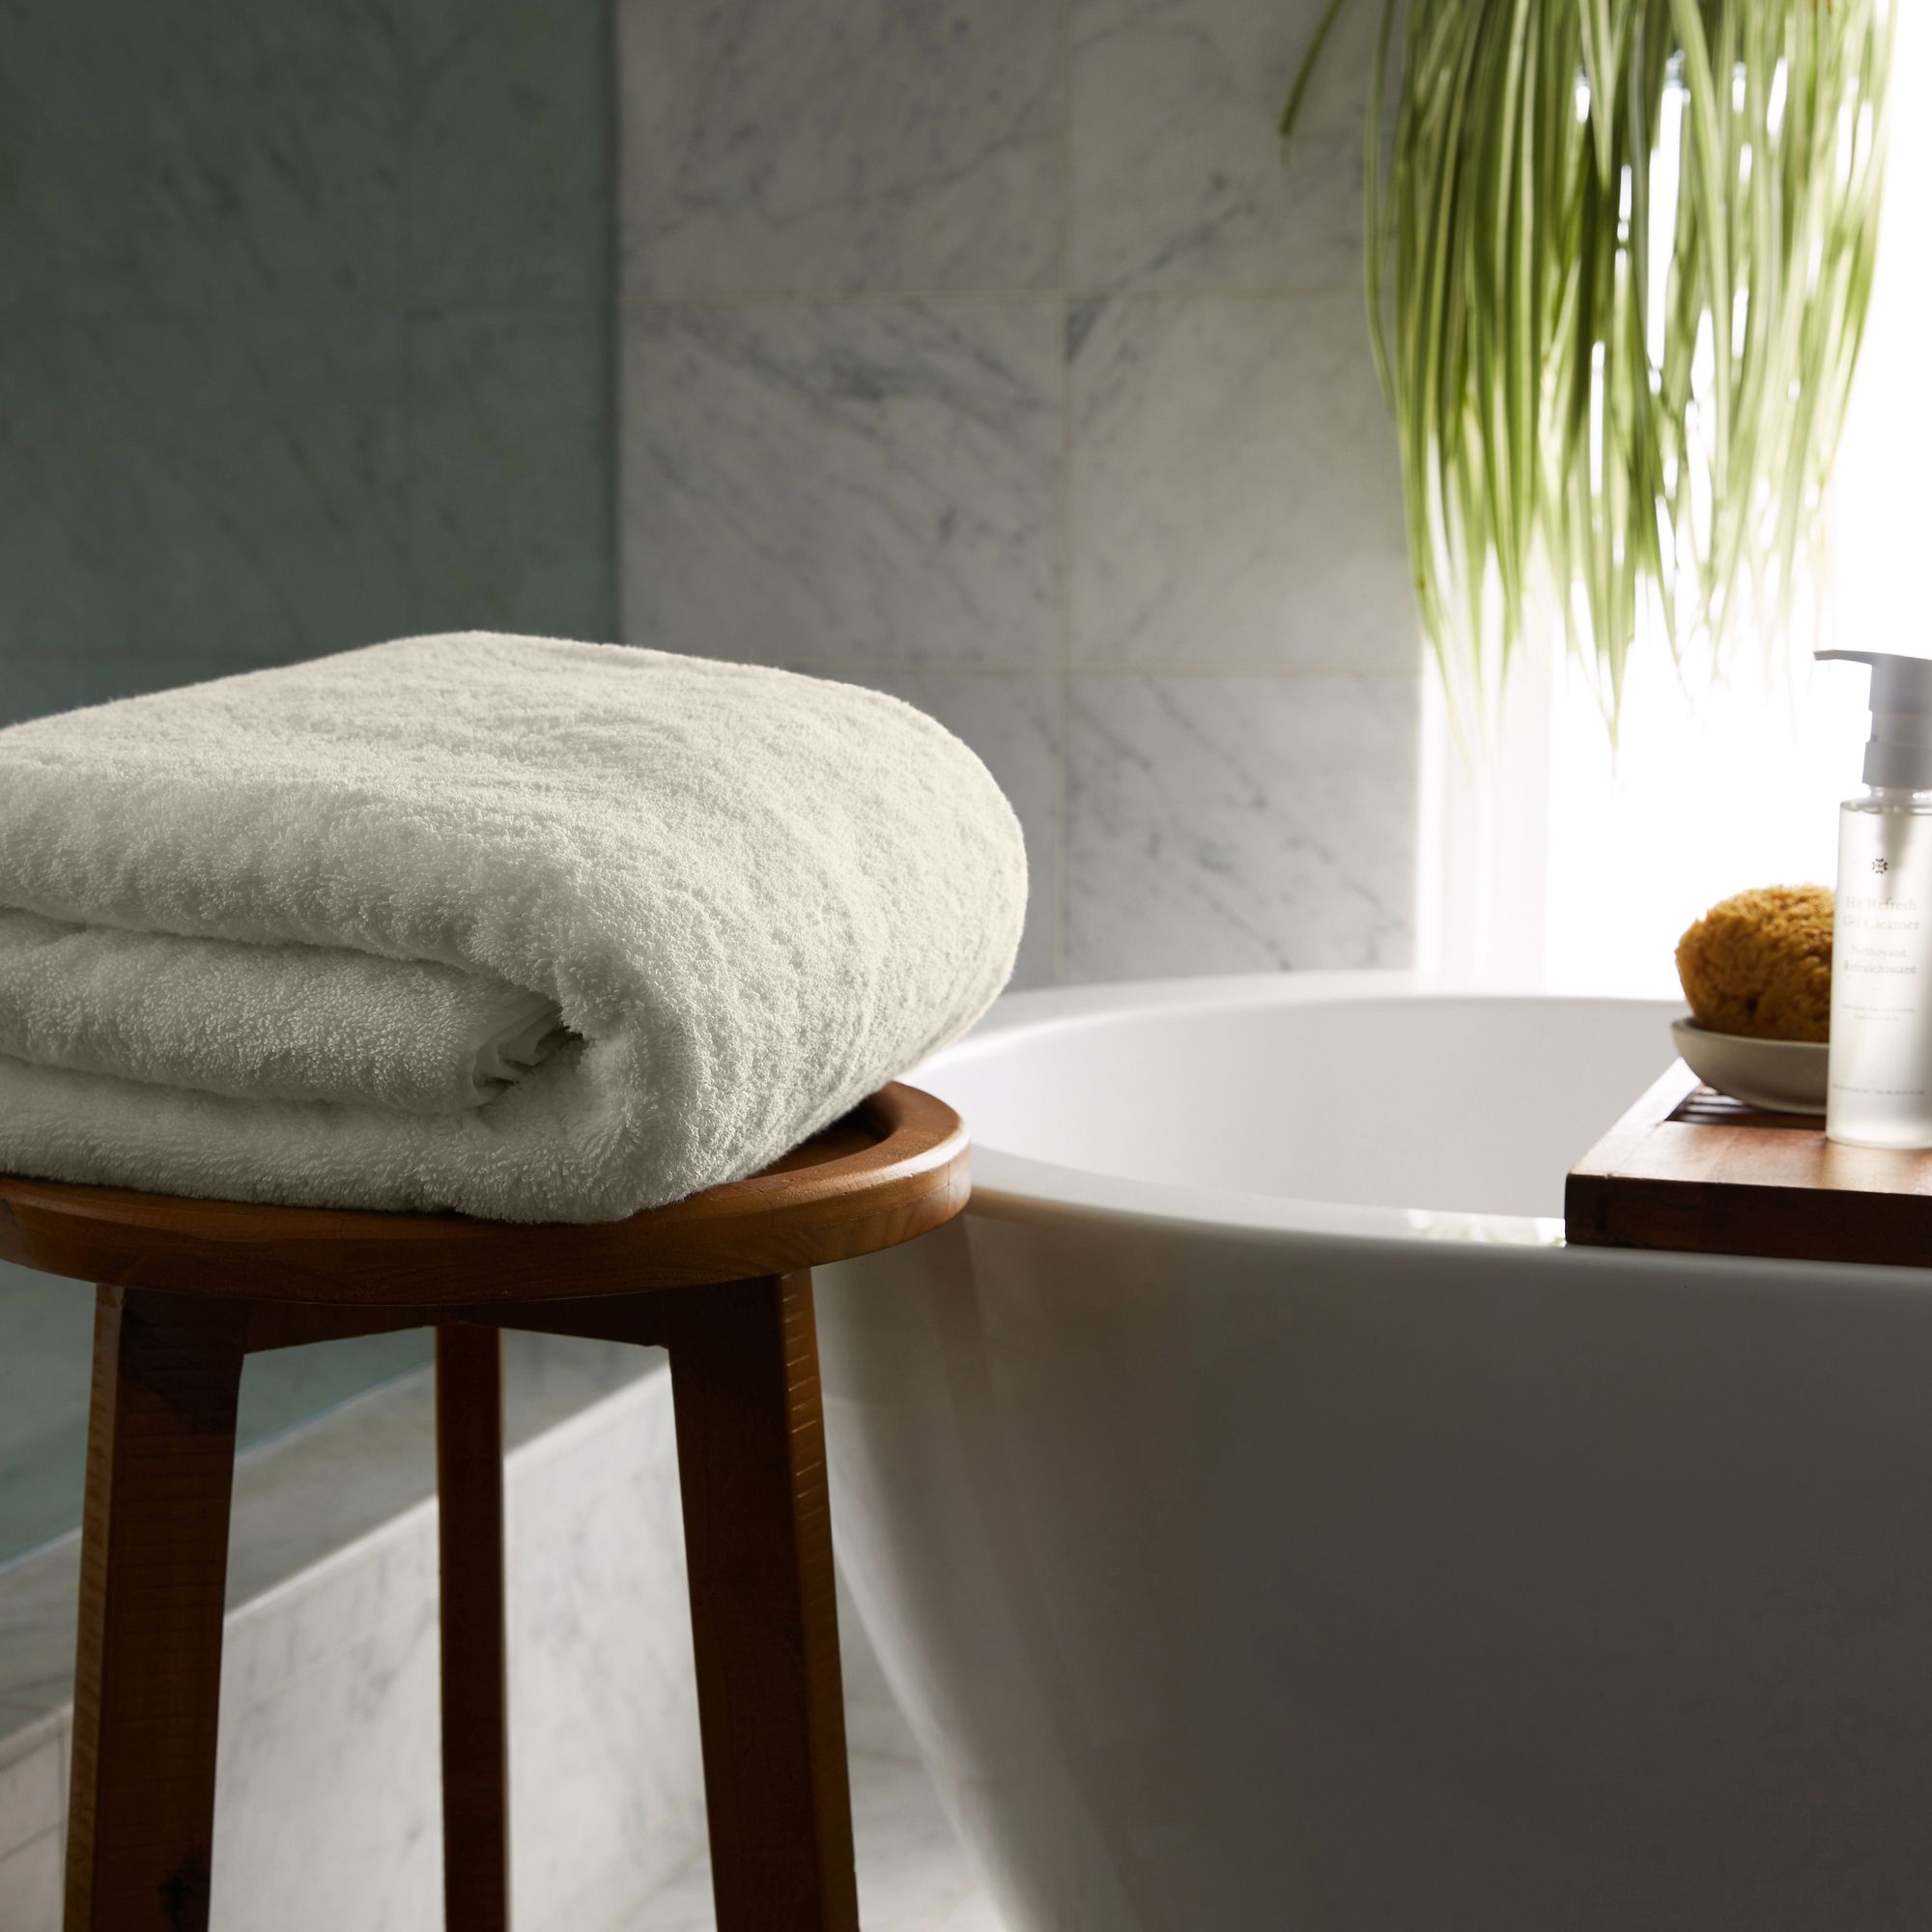 Best Bath Towels to Elevate Your Daily Routine